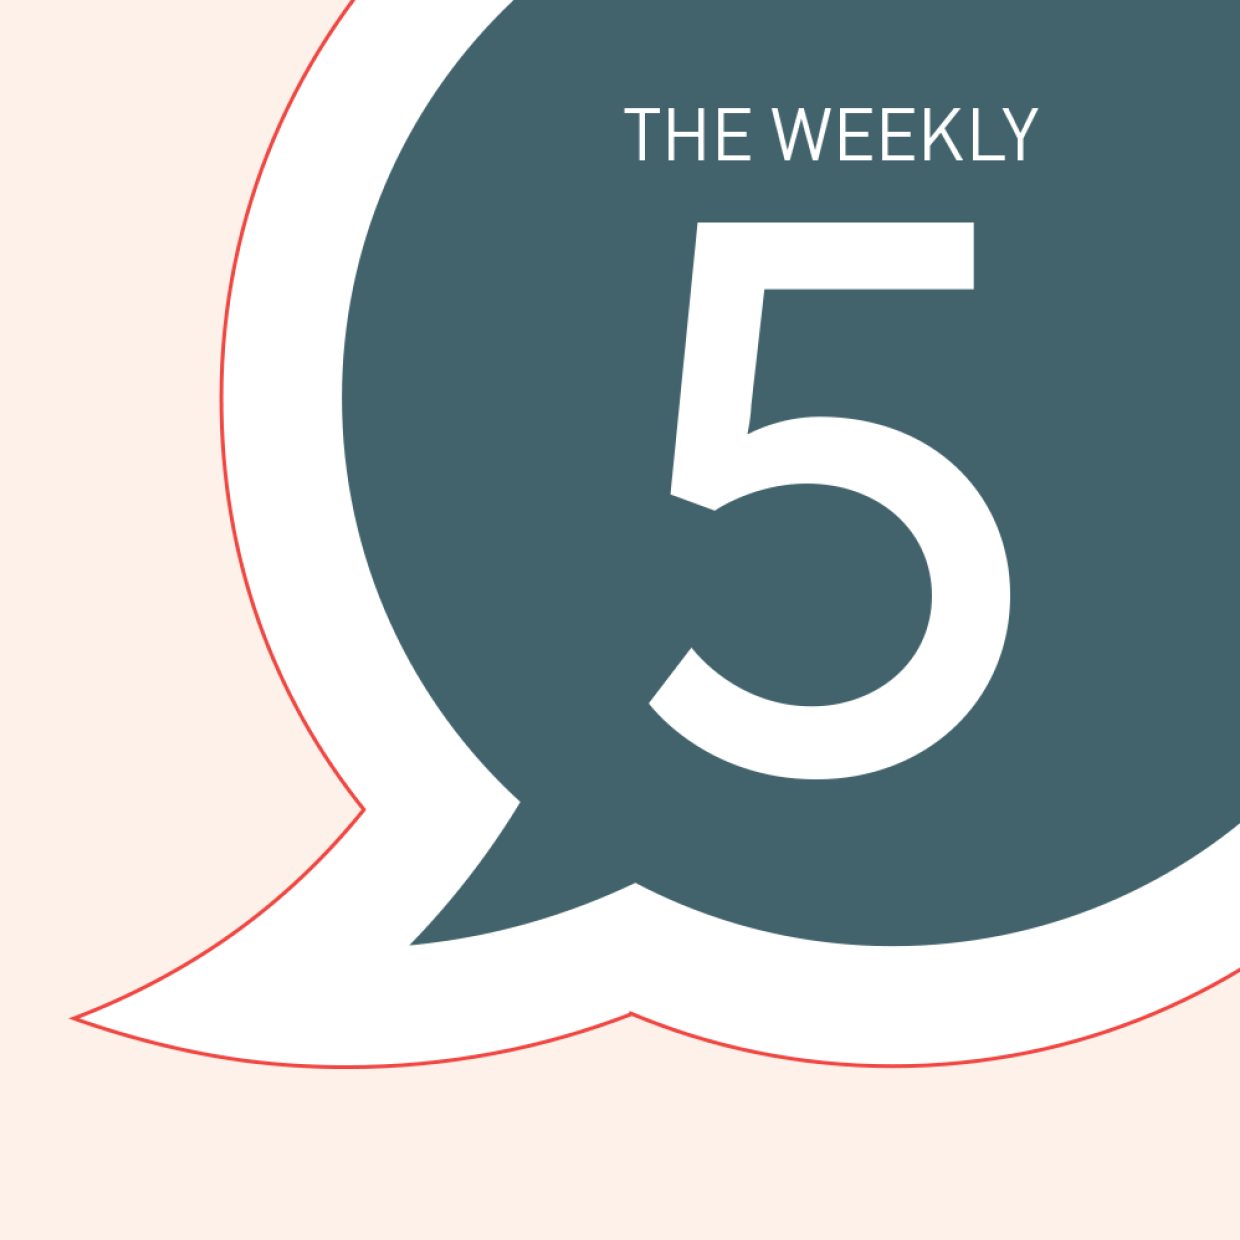 The Economics Weekly 5 catch up